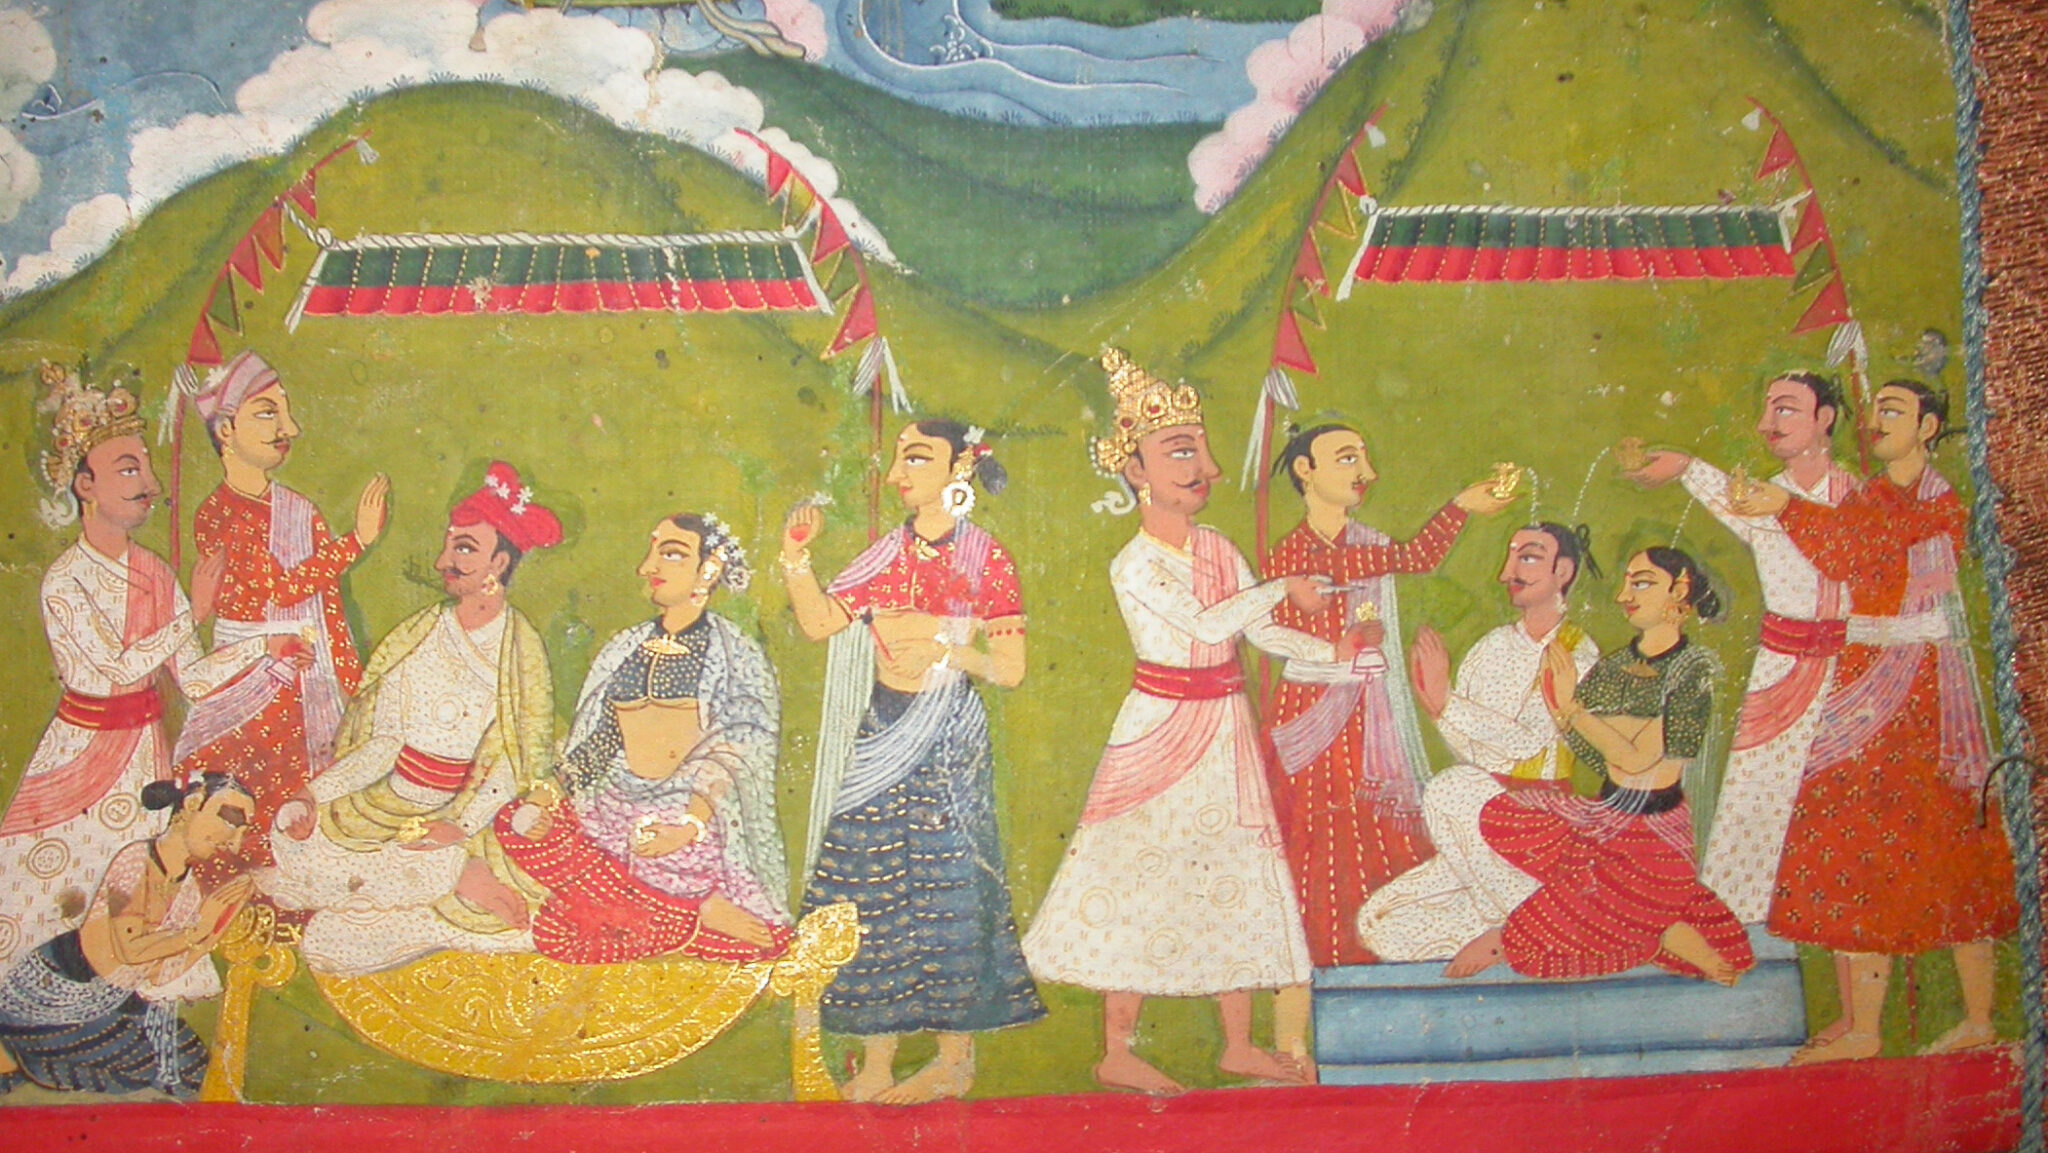 Two magnificently dressed couples, flanked by attendants, seated underneath canopies and deity portraits in mountain landscape